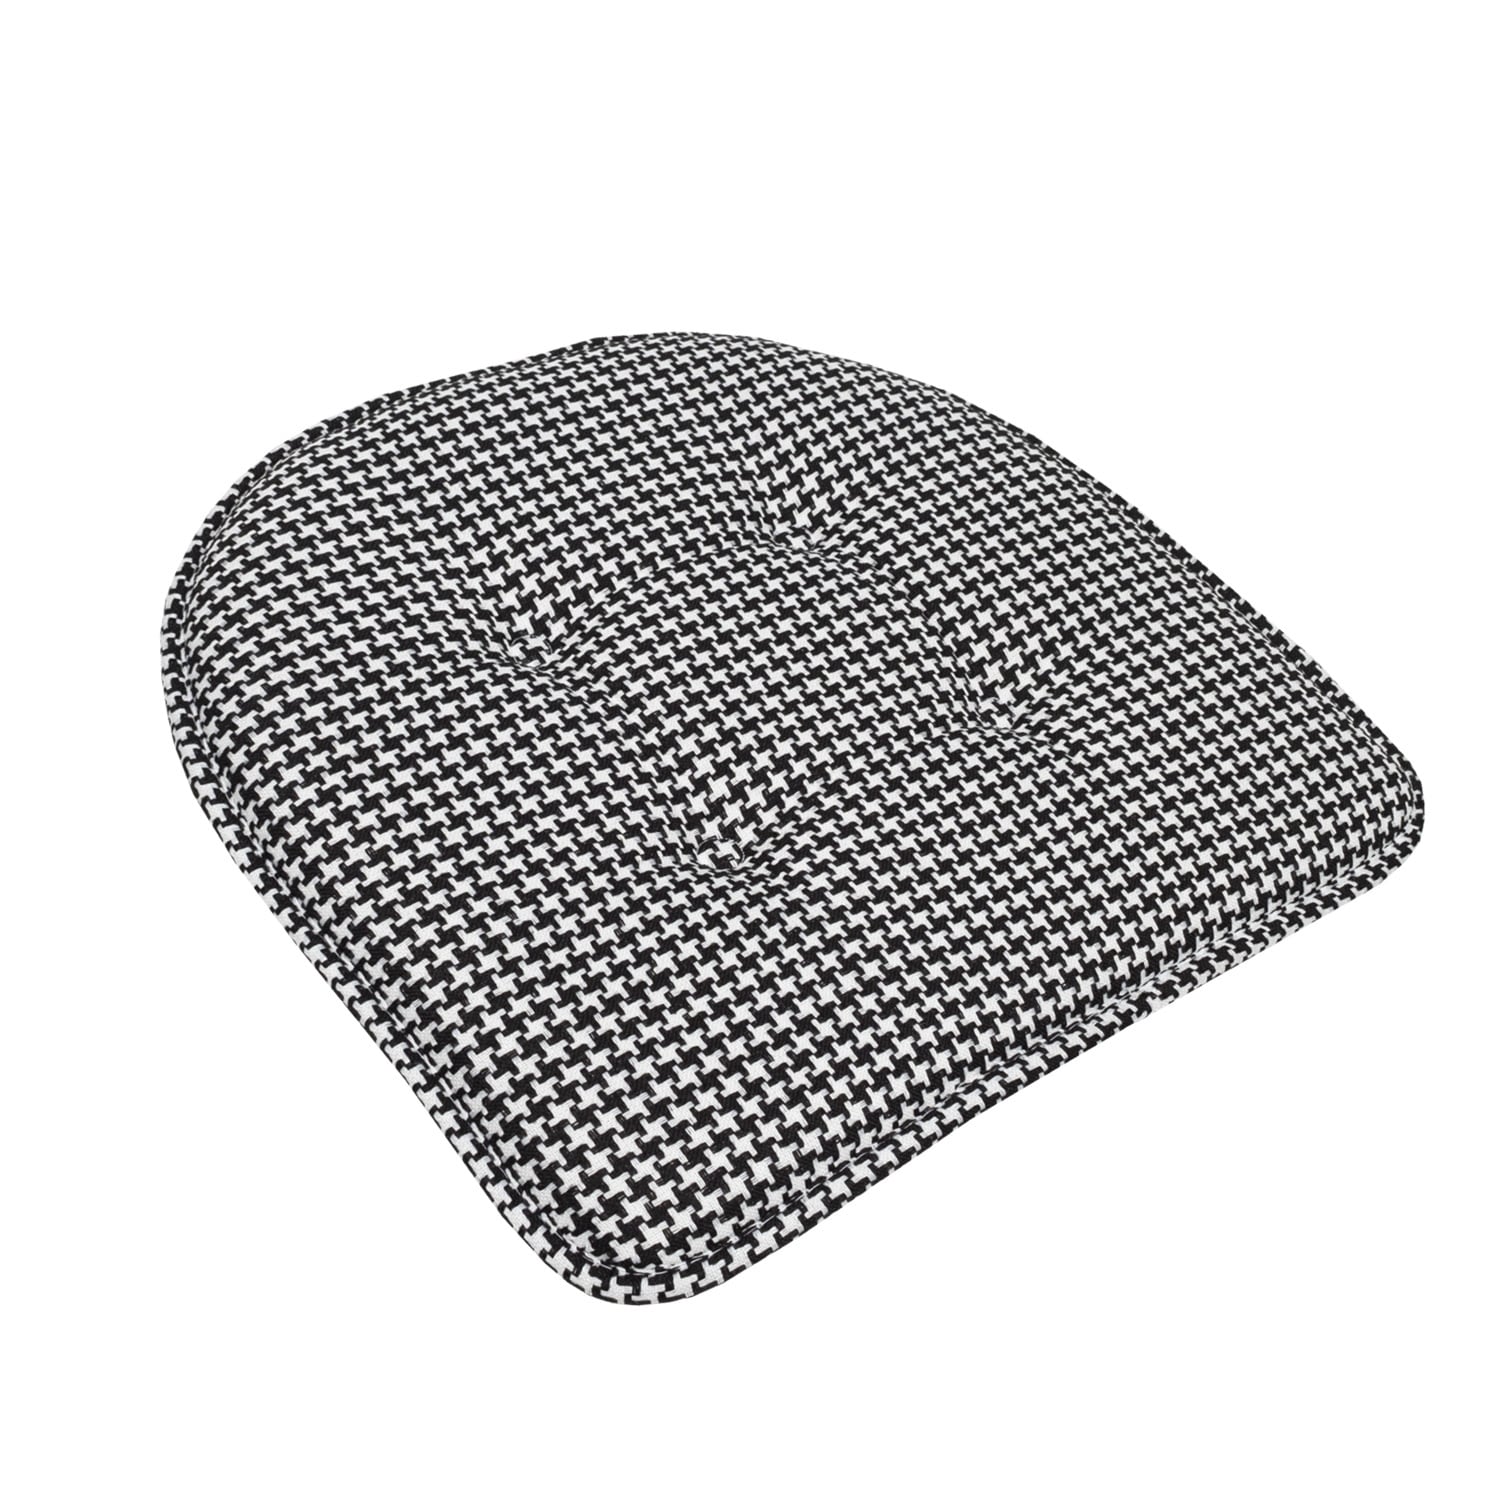 https://ak1.ostkcdn.com/images/products/is/images/direct/8001a8a90834797818492be43b2a62a303b80fc3/Houndstooth-U-Shaped-16-x-17-Memory-Foam-Chair-Pad.jpg